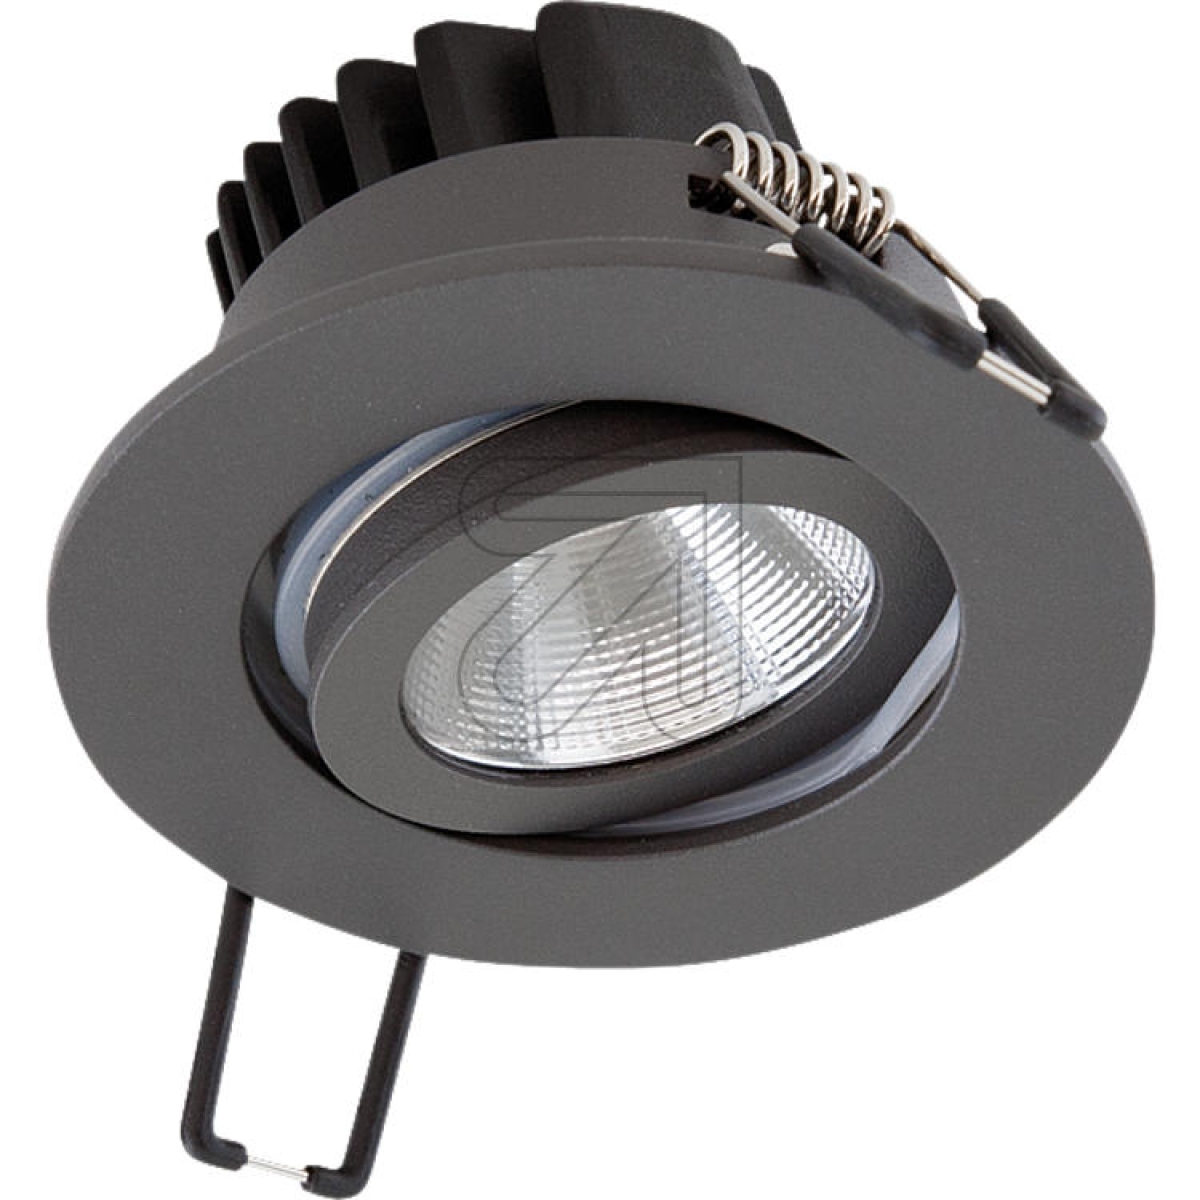 EVNLED recessed spotlight IP65, Ra>90, 6W 4000K, anthr. 230V, beam angle 38°, swiveling, dimmable, PC650N61640Article-No: 650180